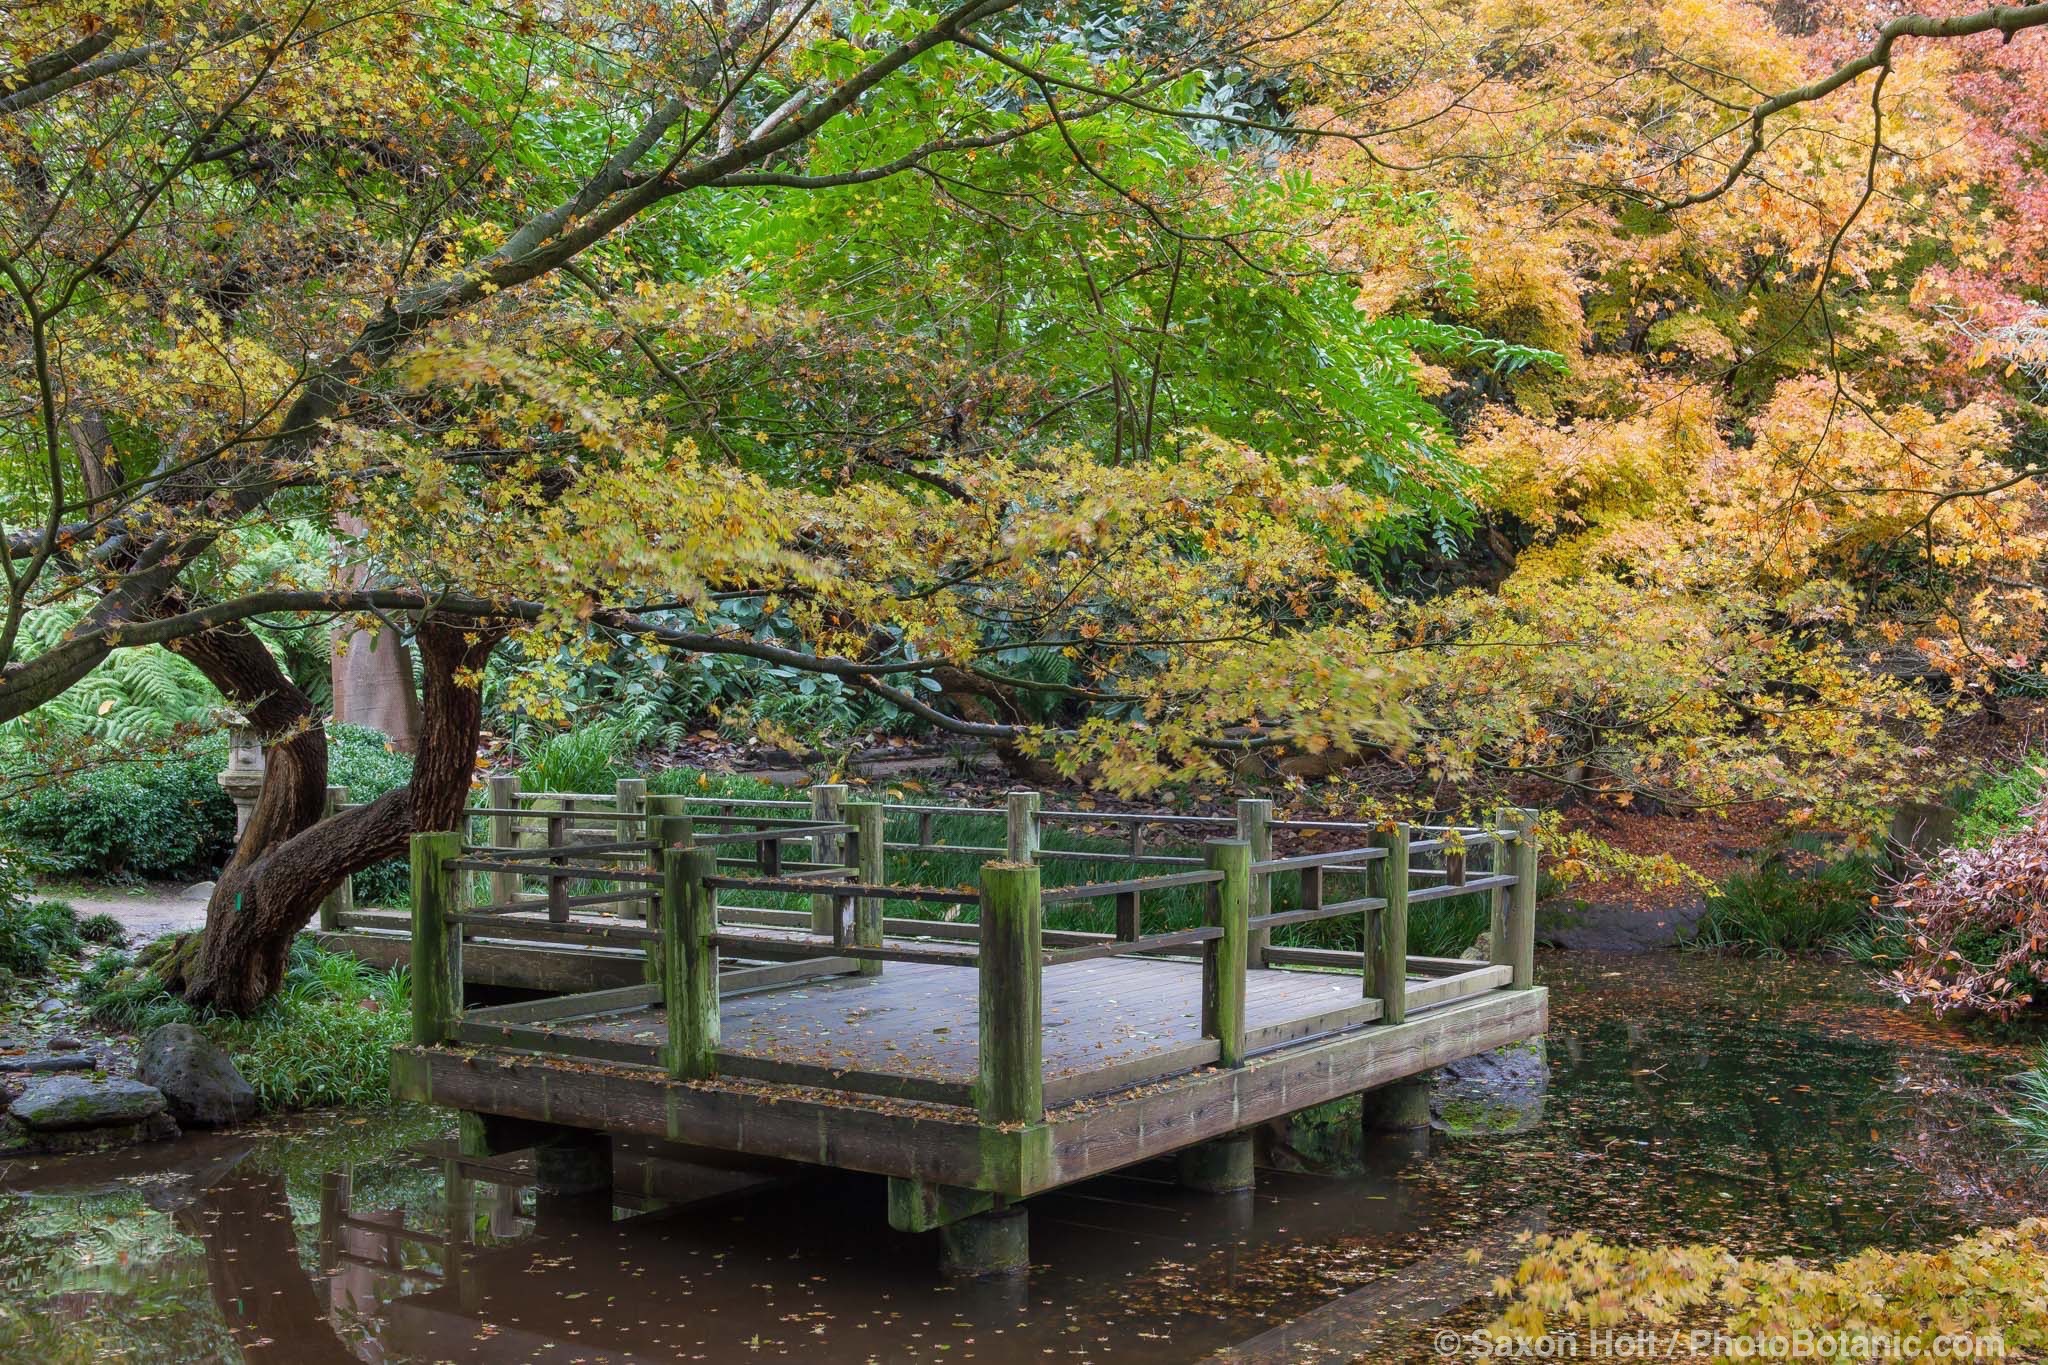 Platform viewing deck over pond in Moon Viewing Garden in San Francisco Botanical Garden with fall foliage color in Japanese Maple trees.